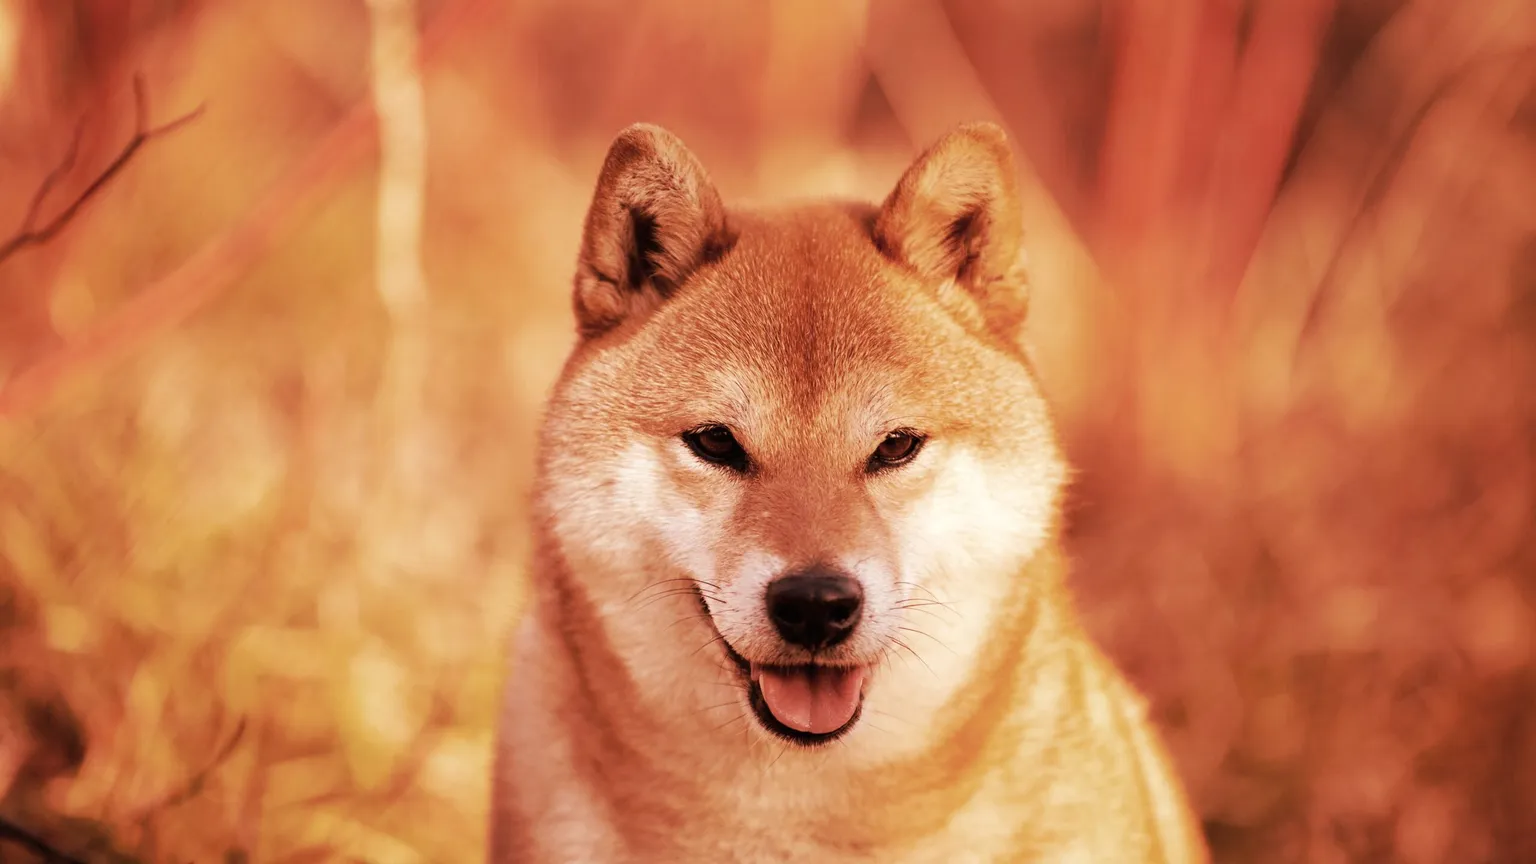 Dogecoin may have started as a joke, but its addition to the Coinbase Wallet may help it to take off. Will Binance and Huobi be next?